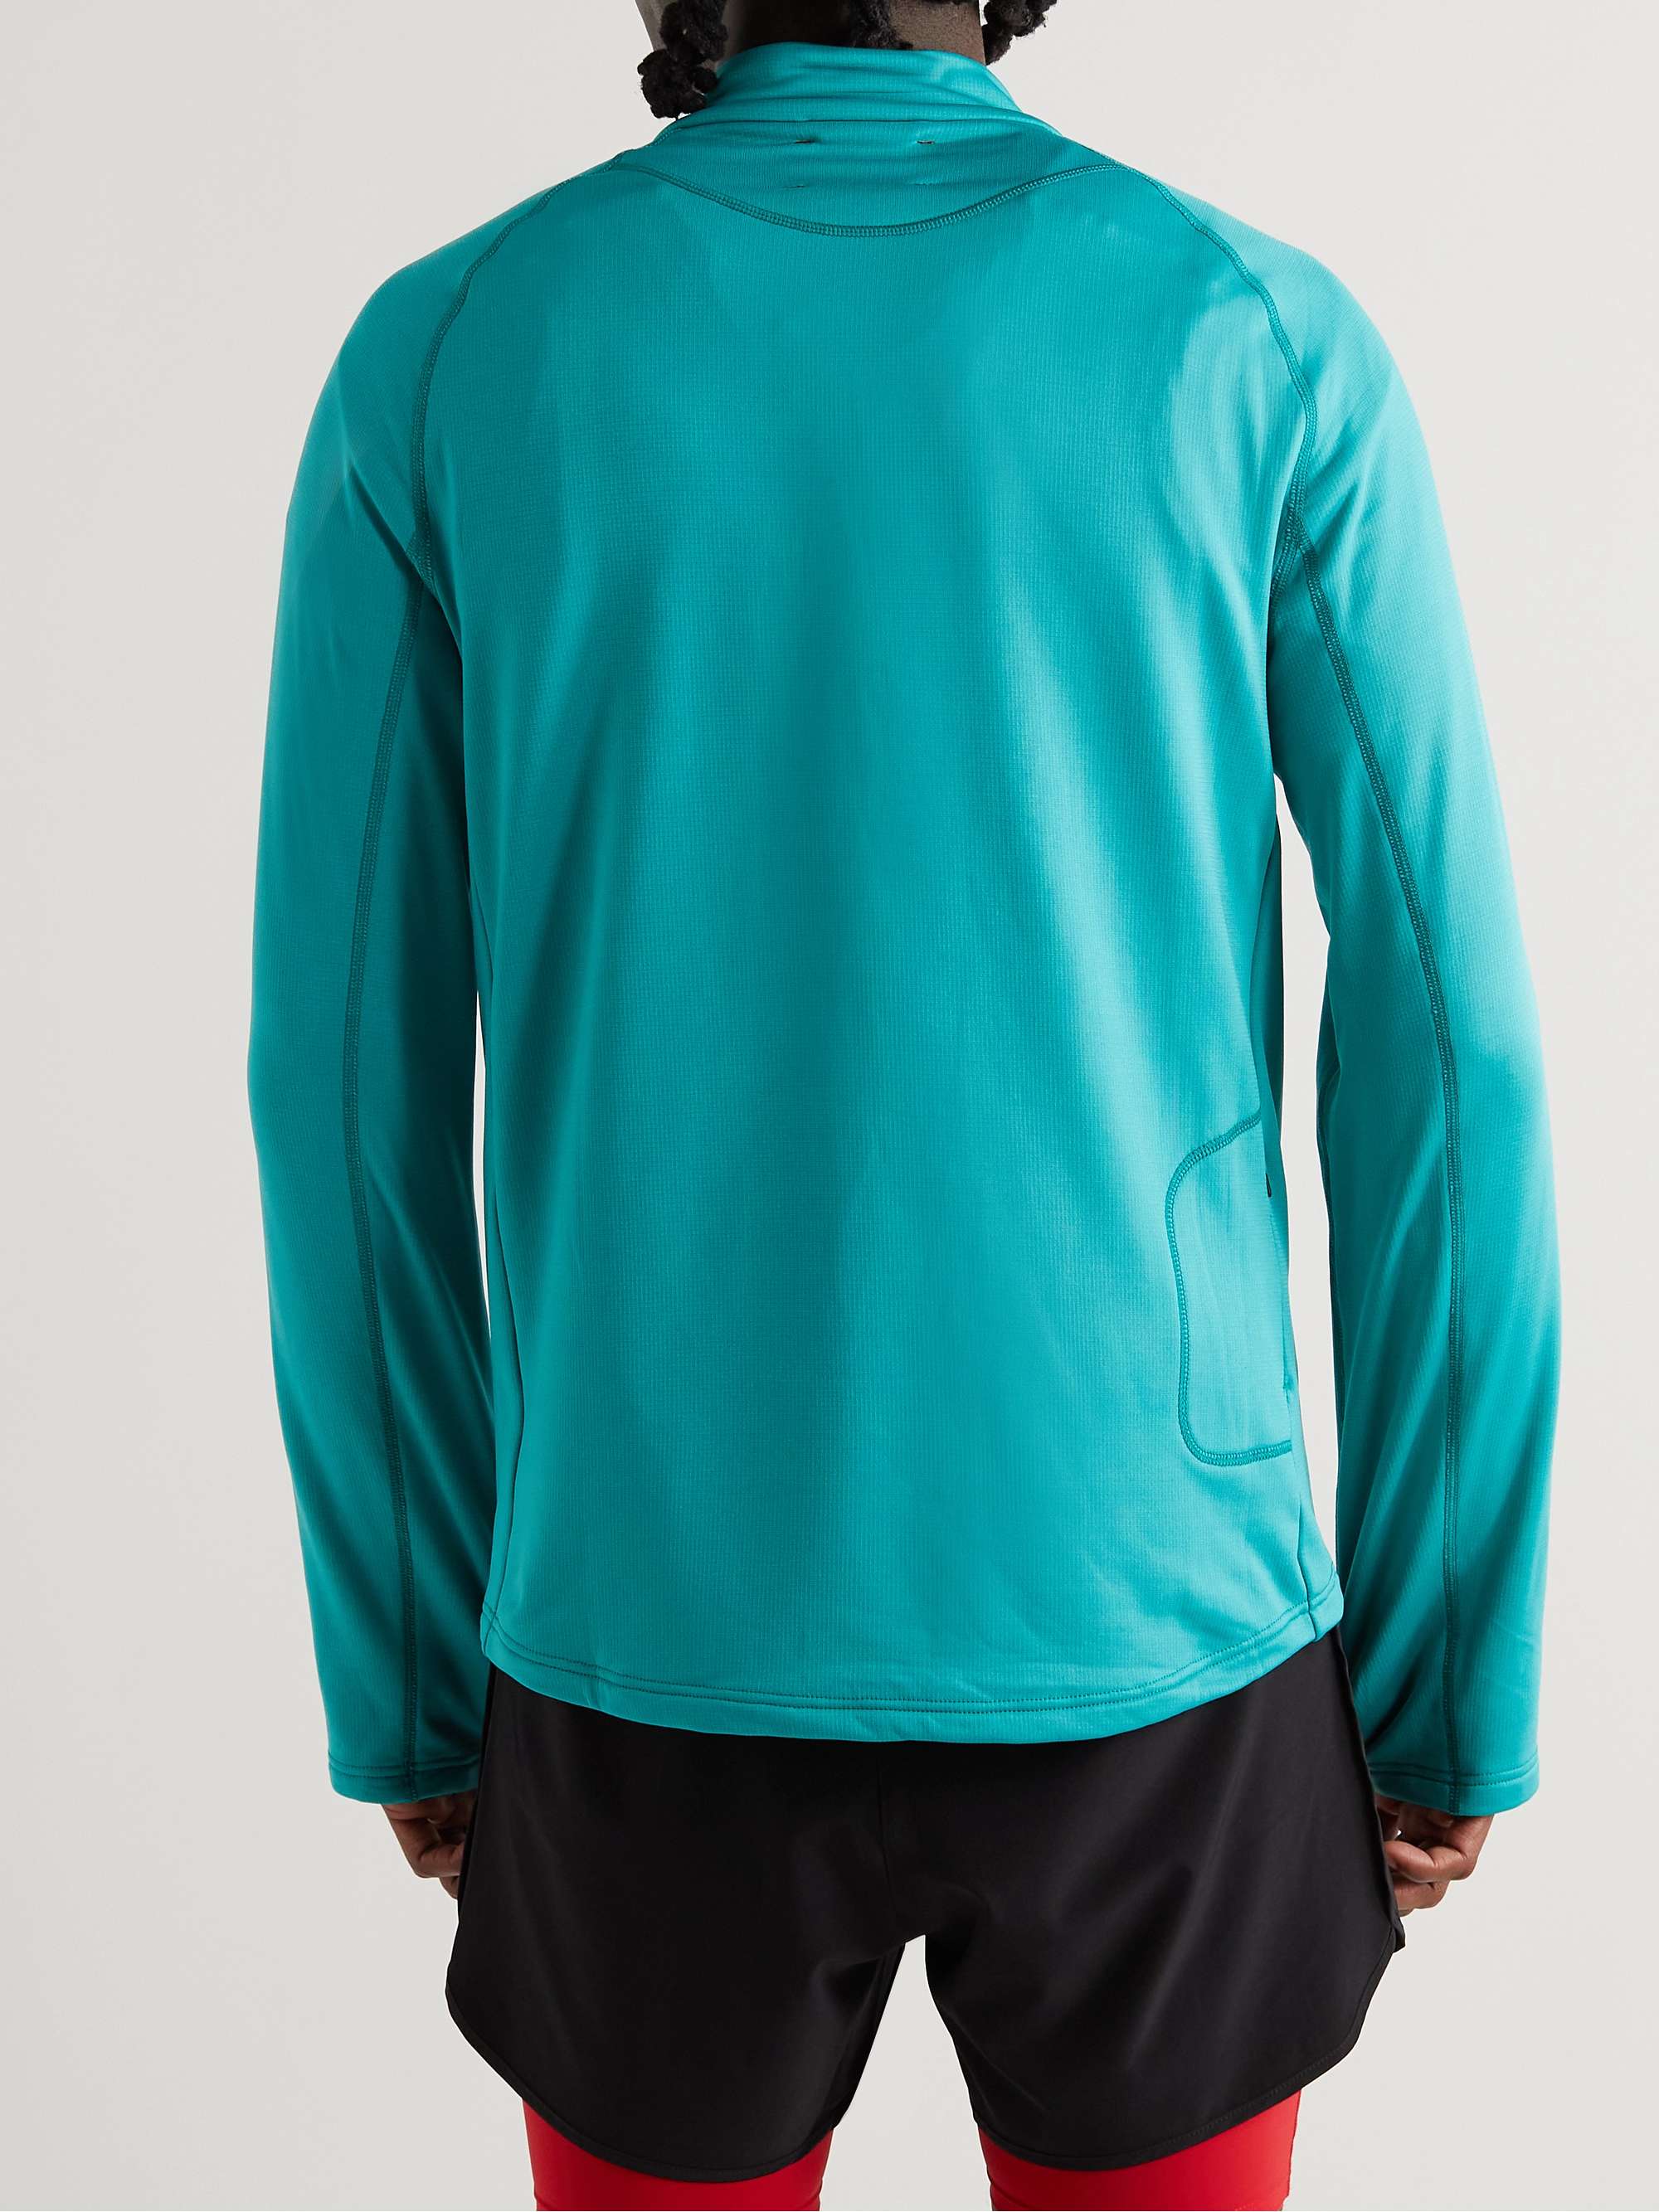 DISTRICT VISION Luca Shell-Trimmed Recycled Stretch-Jersey Half-Zip Top